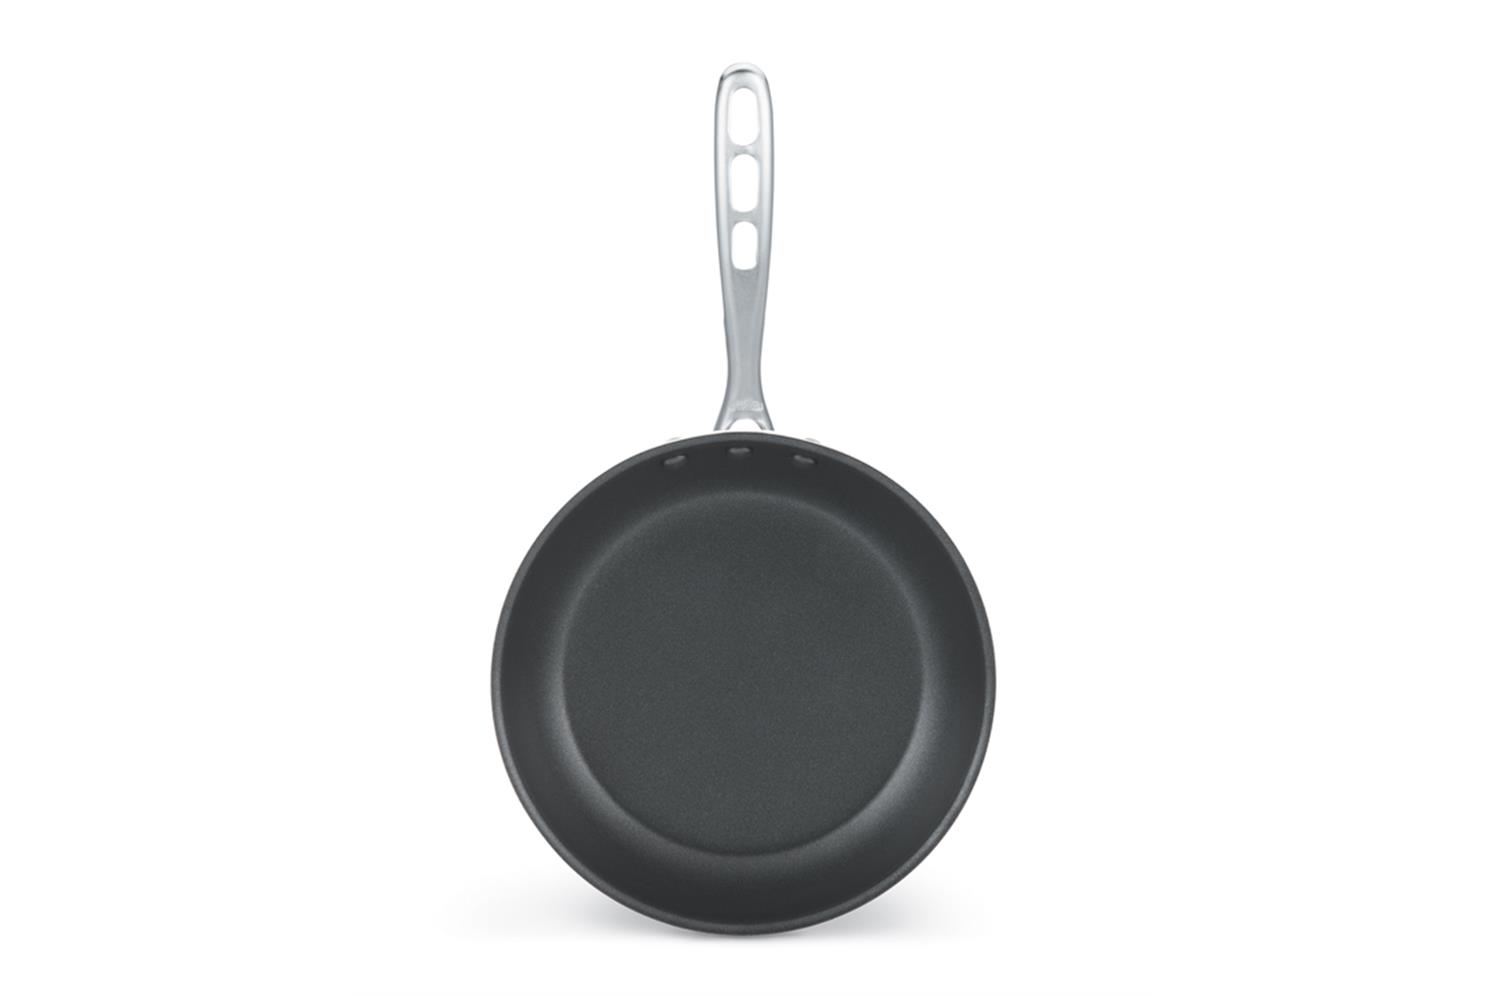 Vollrath 67950 Wear-Ever Fry Pans with CeramiGuard II Interior with TriVent Handle